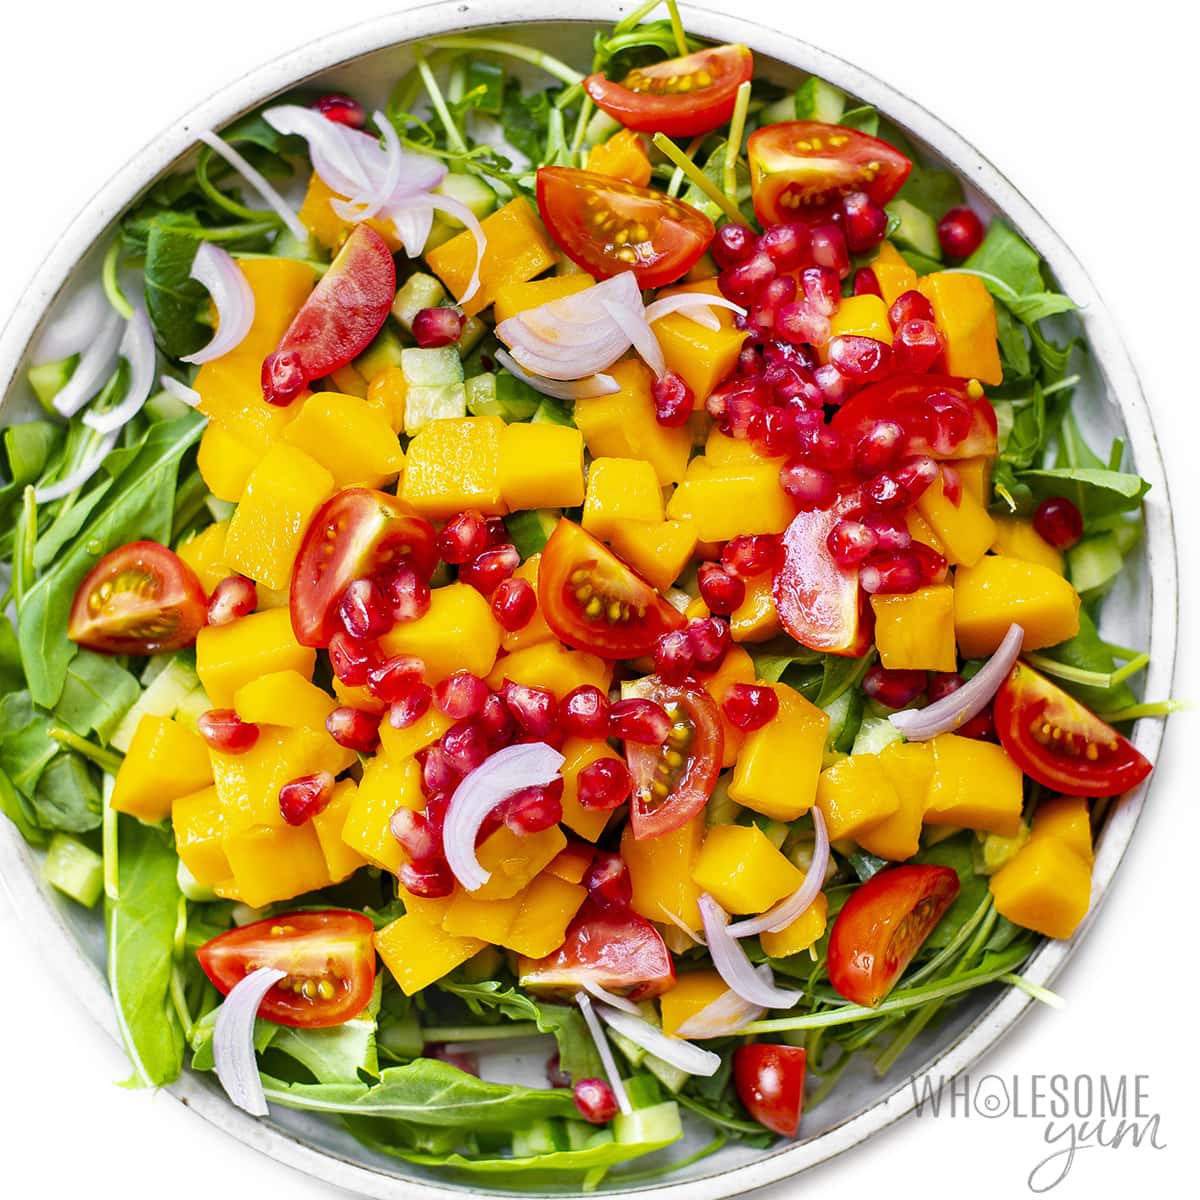 Greens with cucumber, mango, tomatoes, pomegranate, and onions.